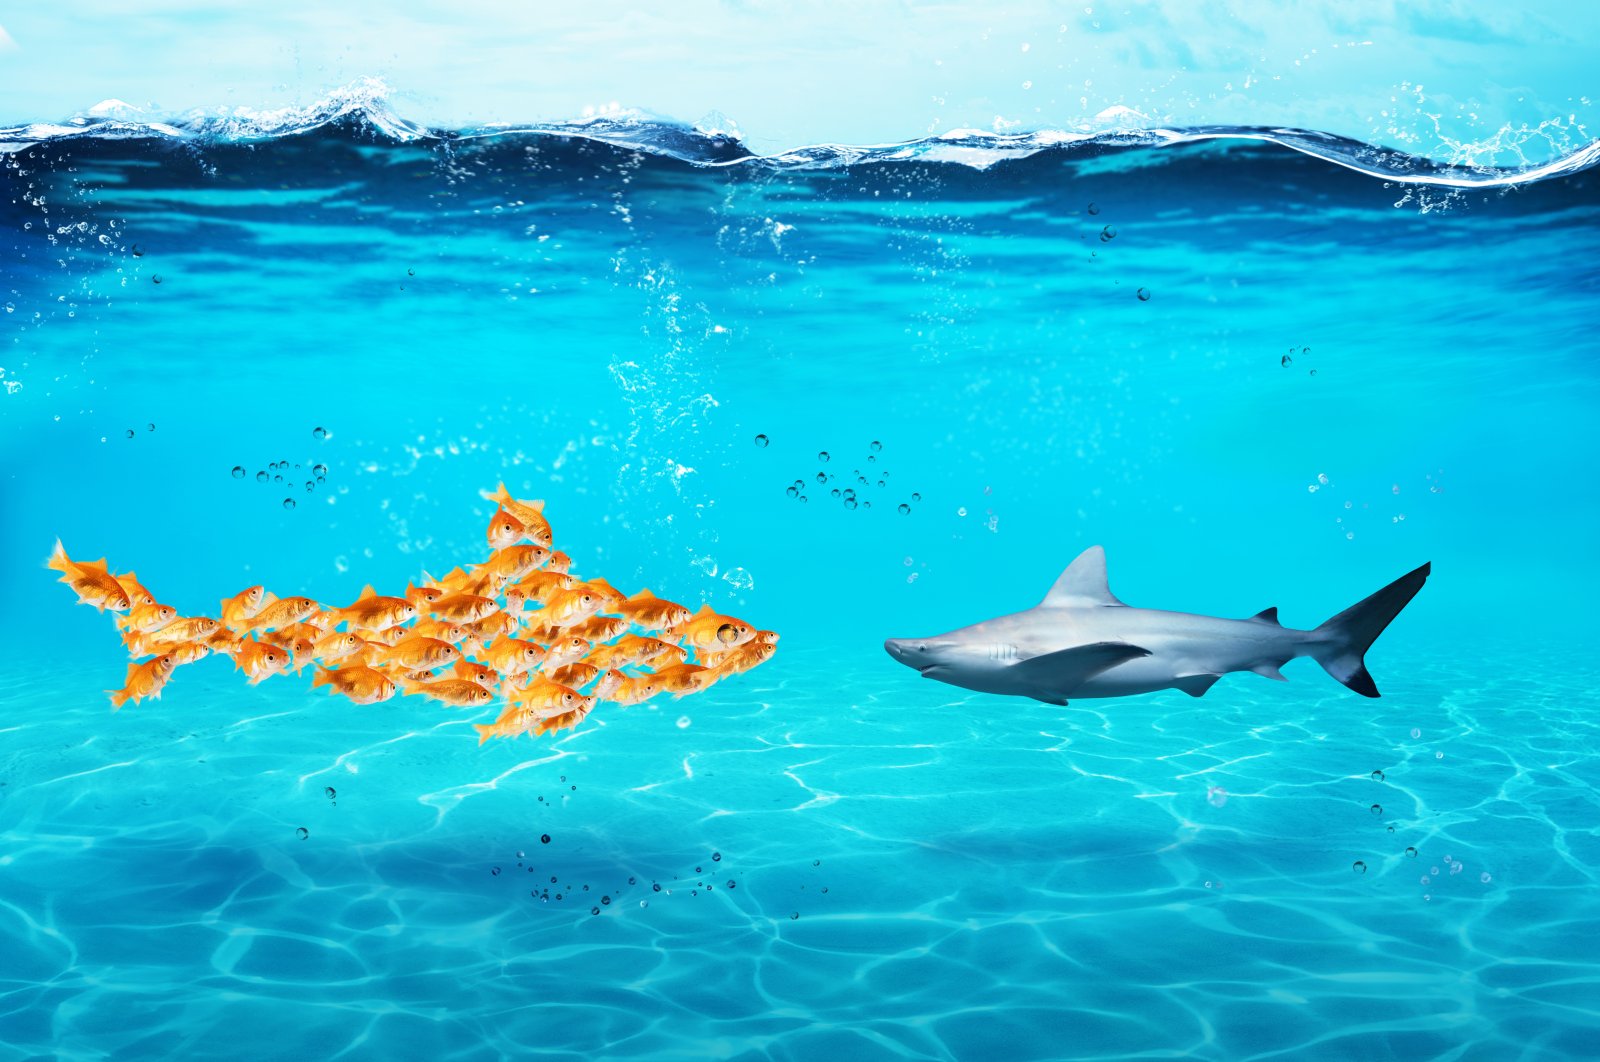 Illustration shows a large shark made of goldfish against a real shark. (Shutterstock Photo)